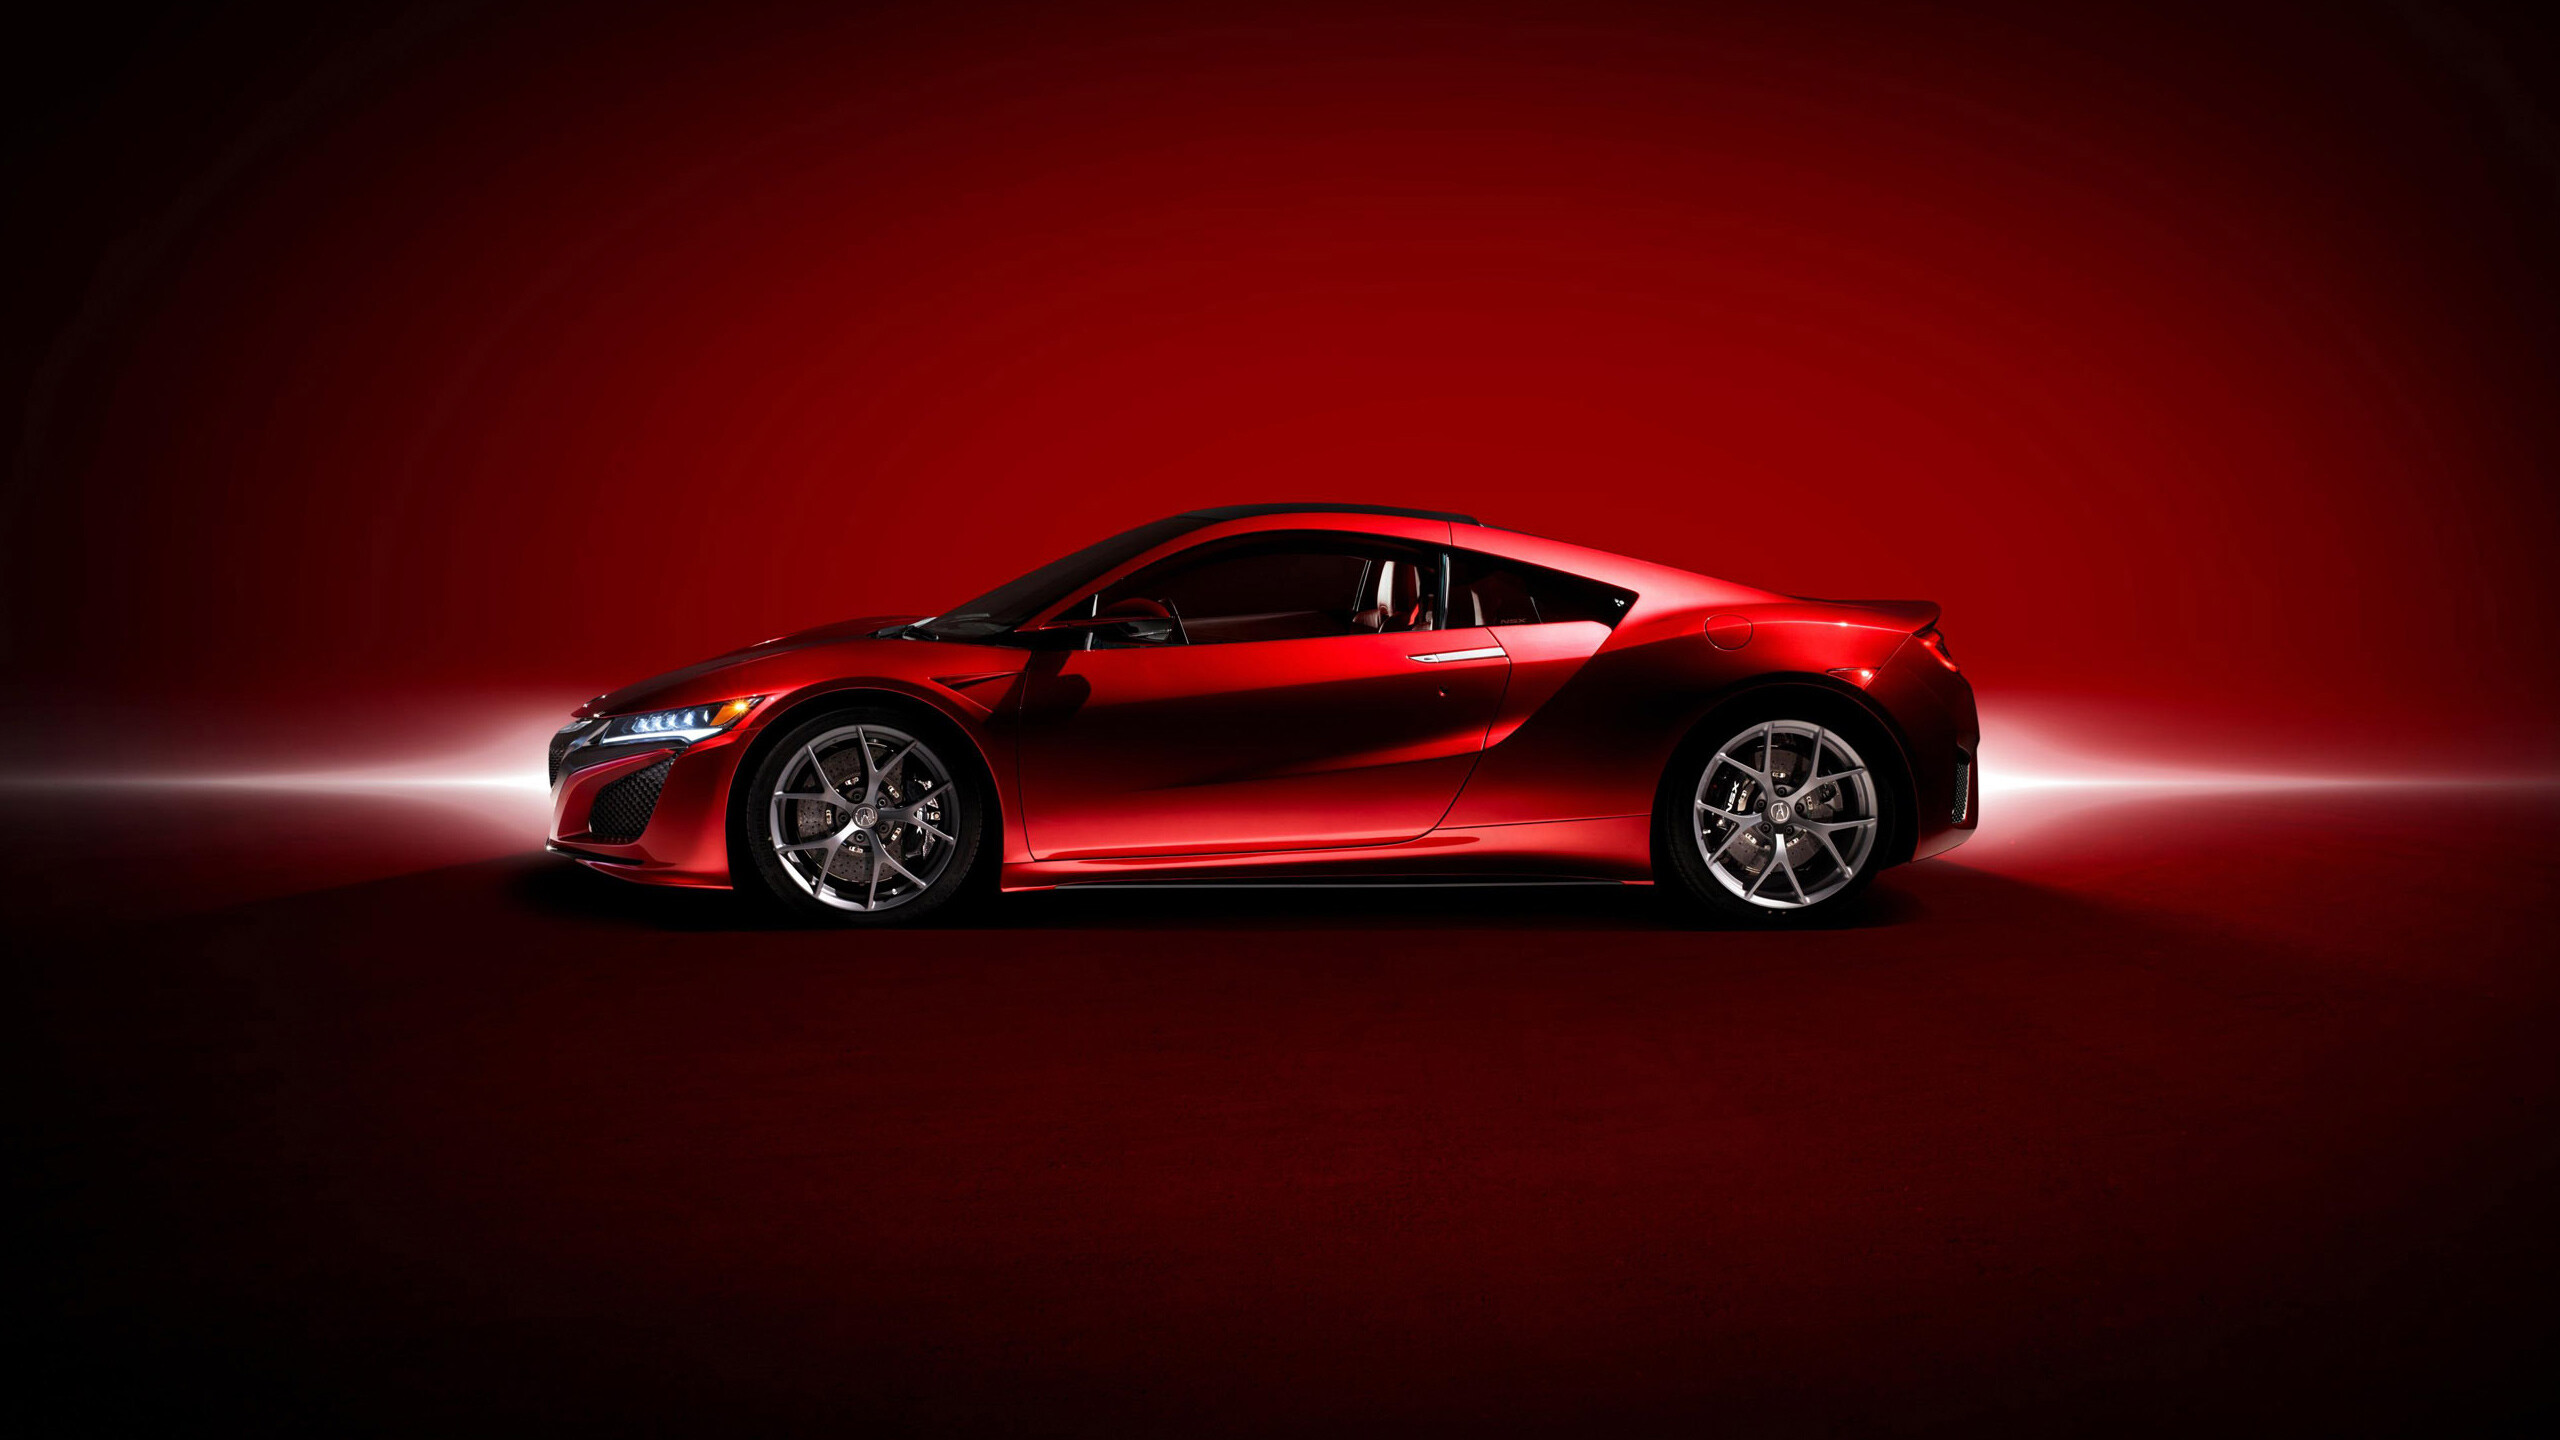 Acura wallpapers, High quality, Car enthusiasts' collection, 2560x1440 HD Desktop